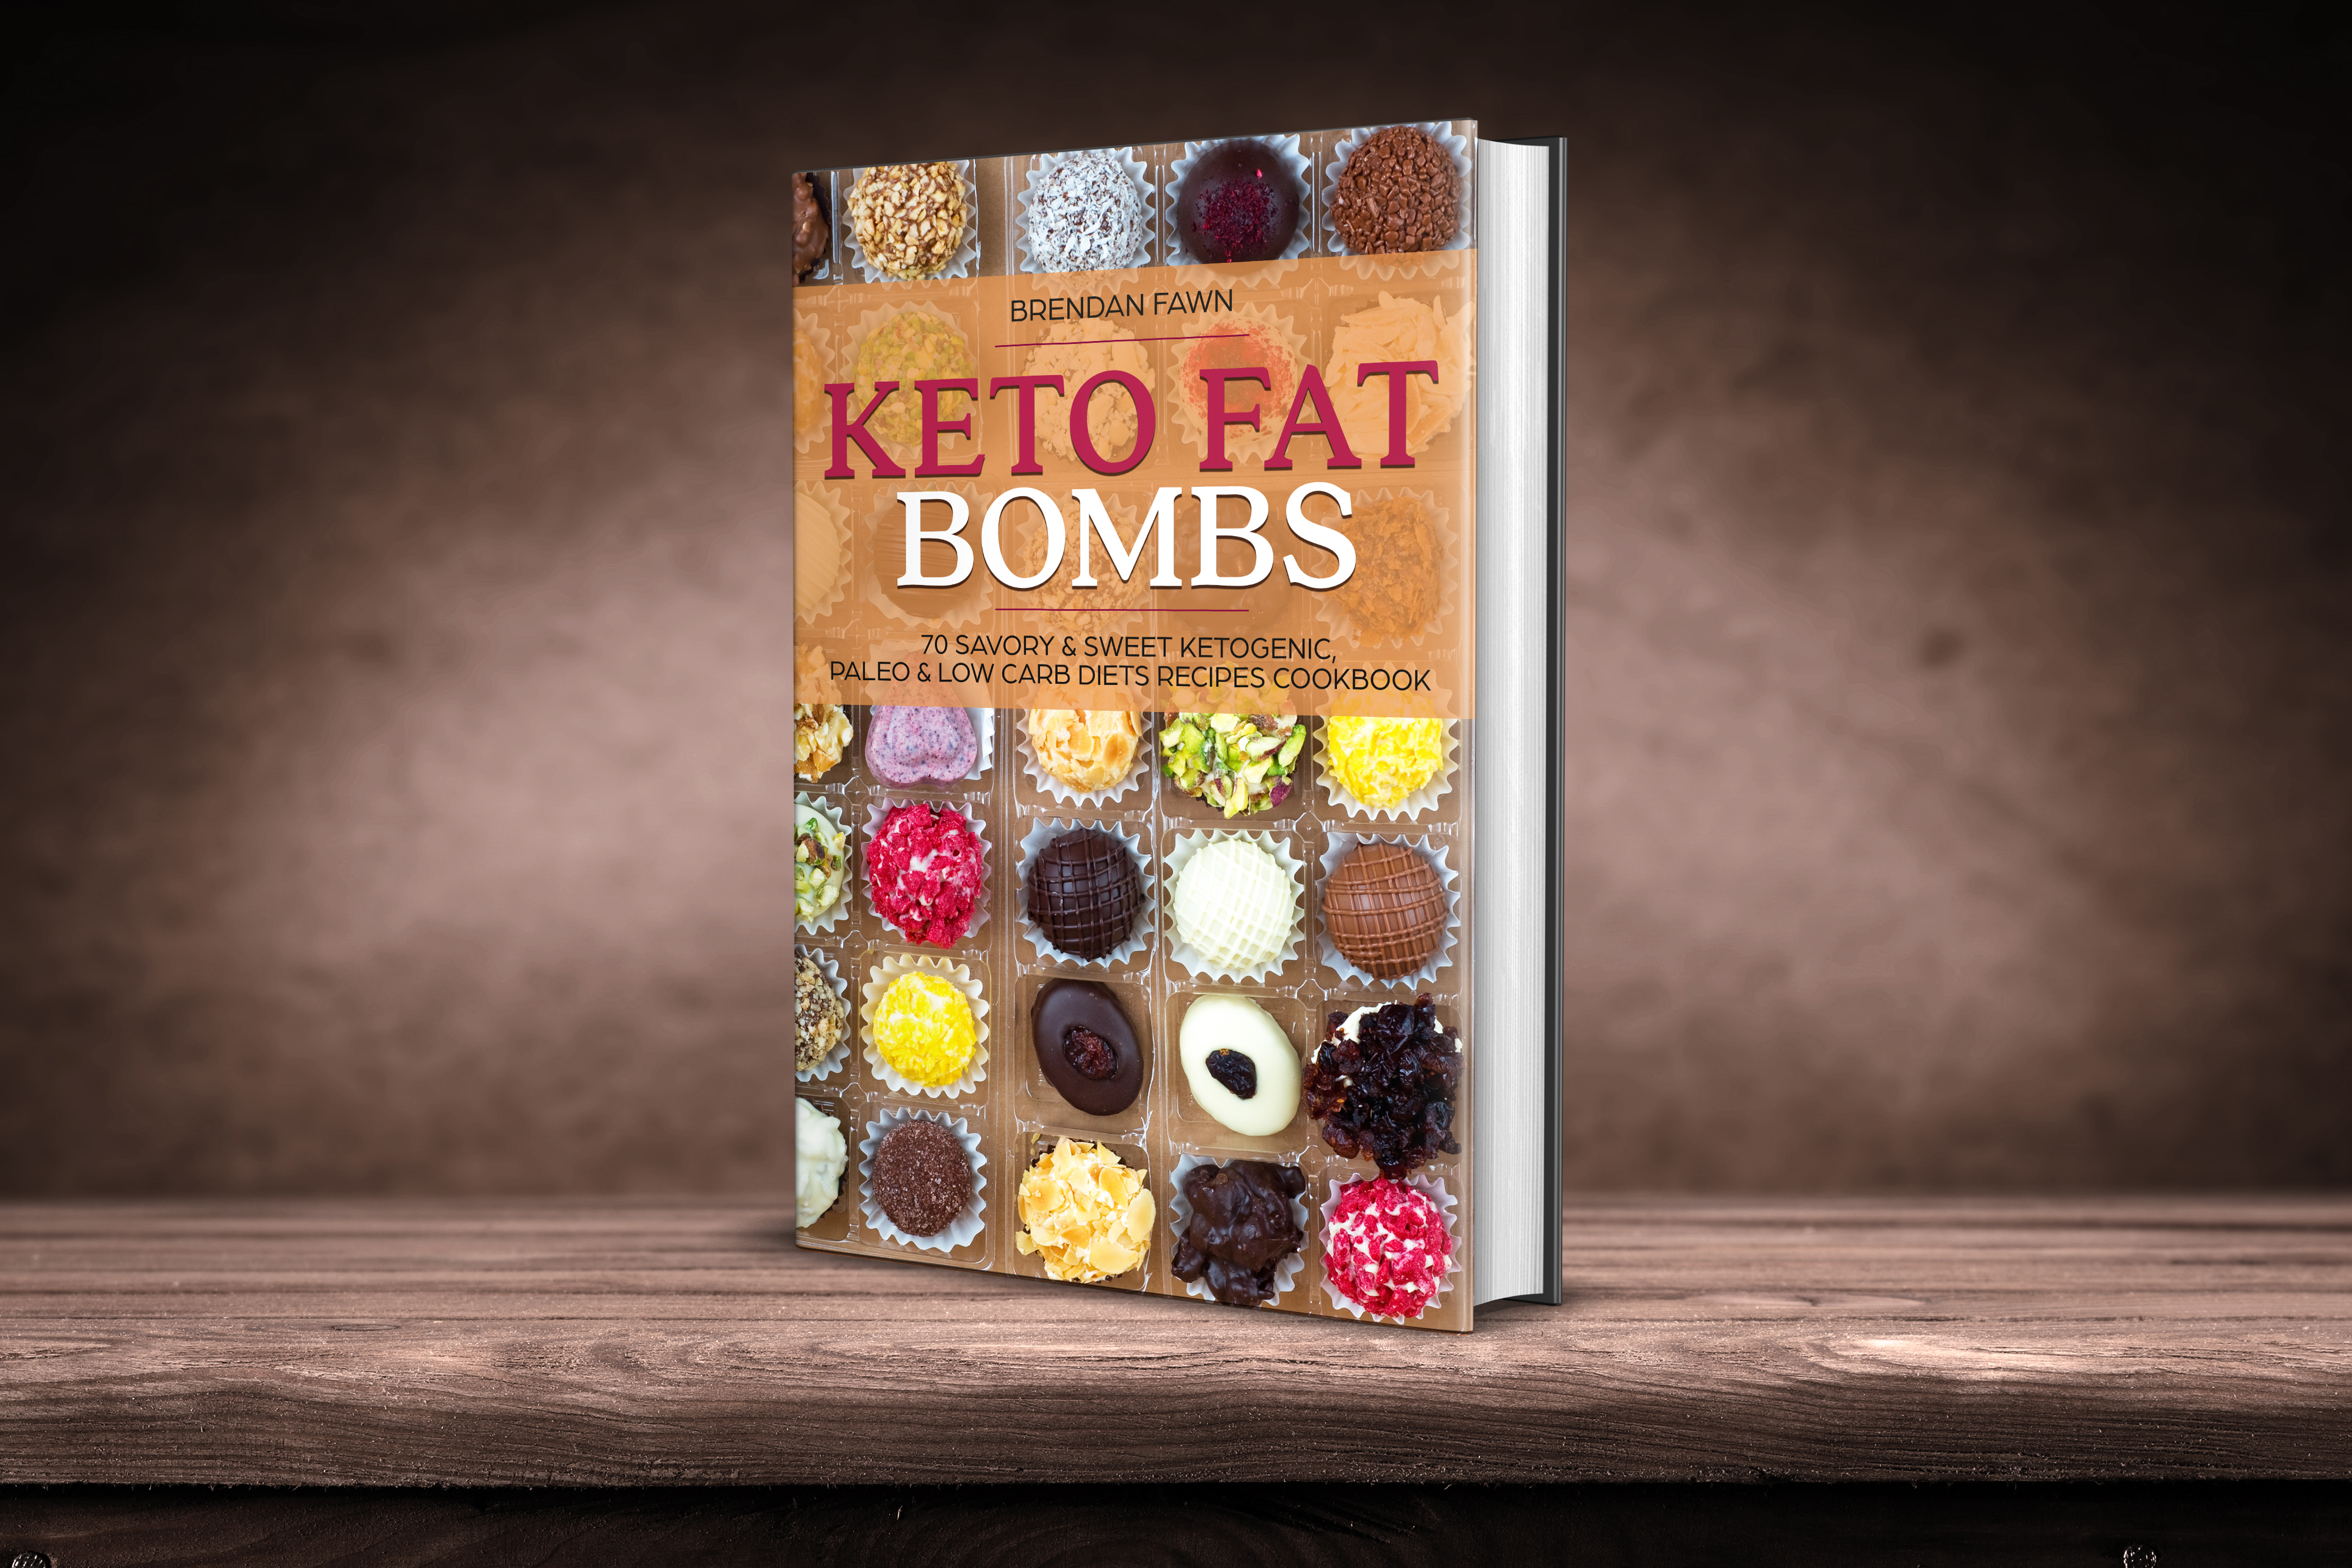 FREE: Keto Fat Bombs: 70 Savory & Sweet Ketogenic, Paleo & Low Carb Diets Recipes Cookbook by Brendan Fawn